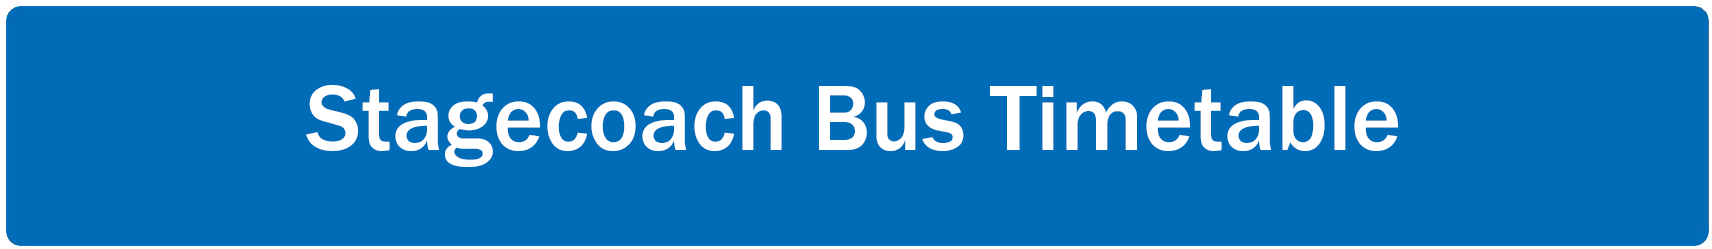 Stagecoach Bus Timetable